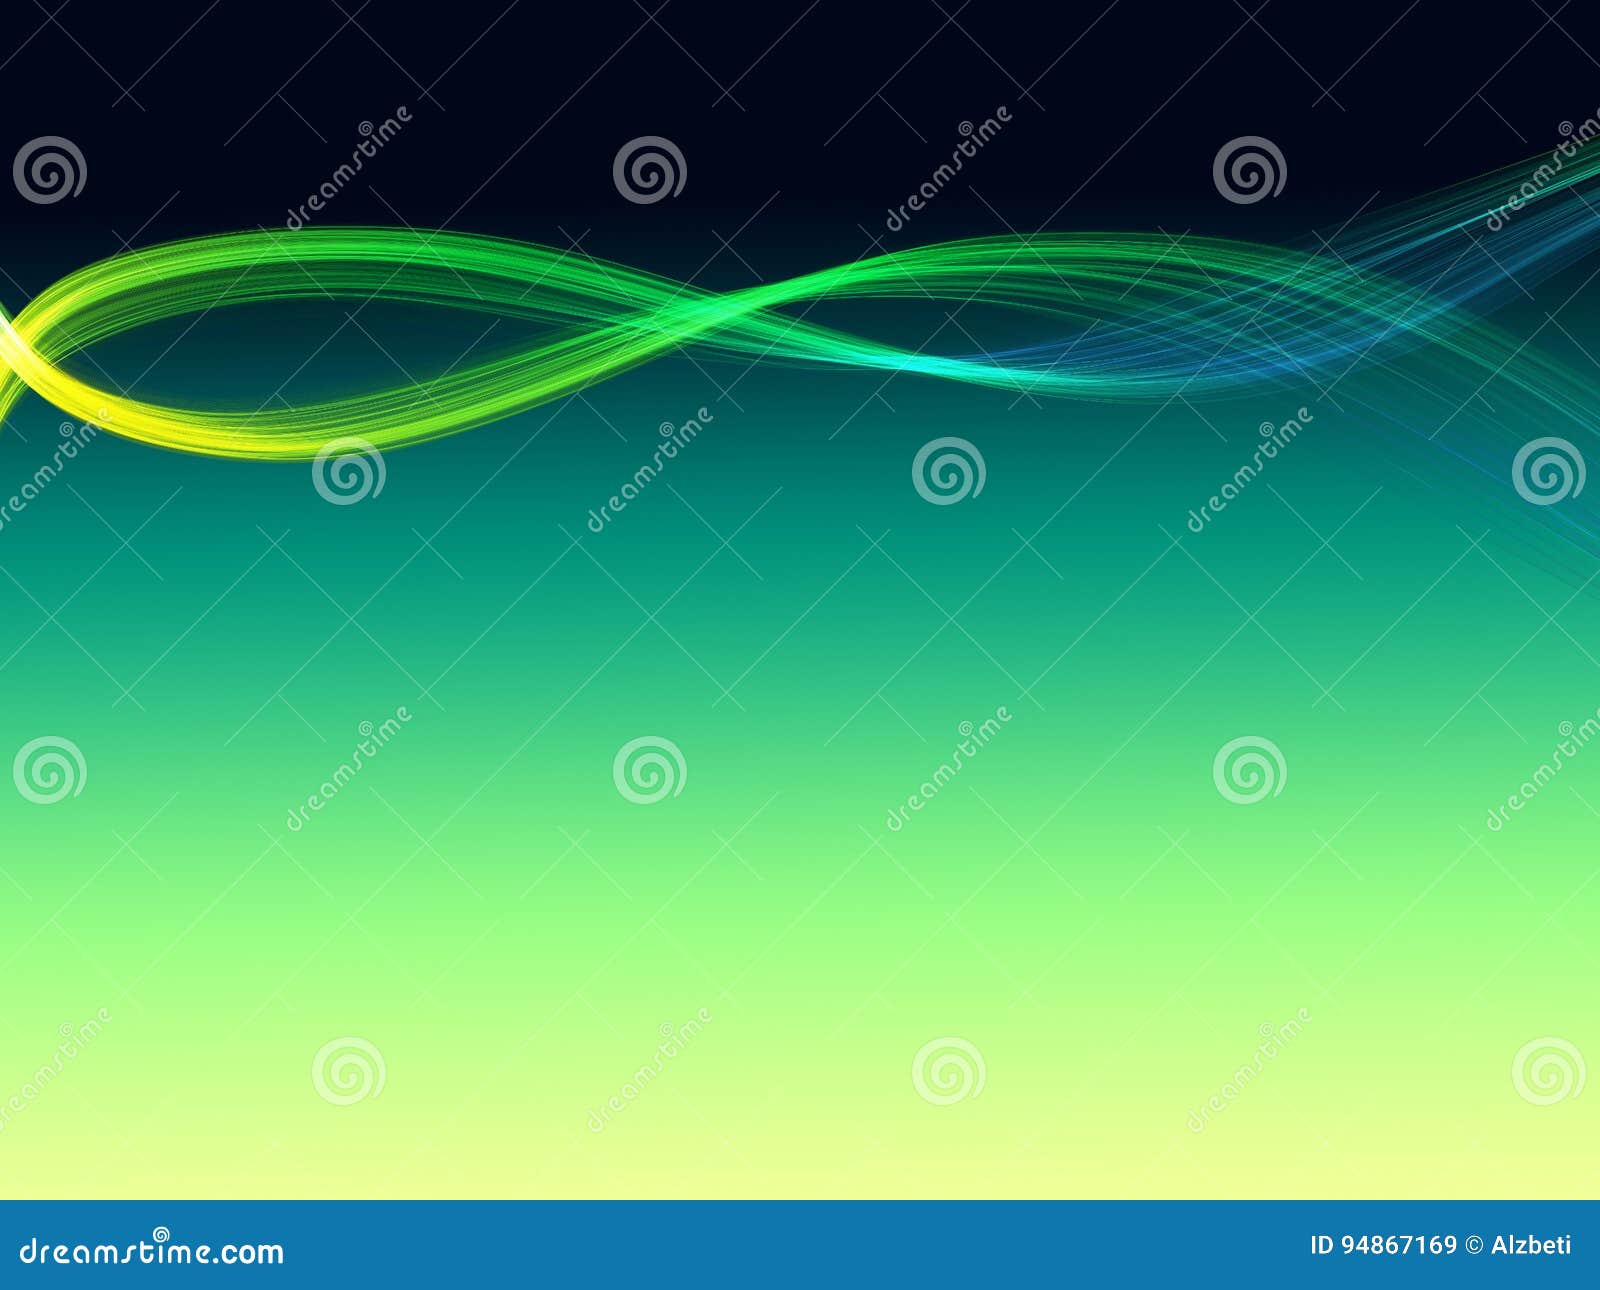 Powerpoint Abstract Background With Abstract Frame Stock Illustration Illustration Of Flame Modern